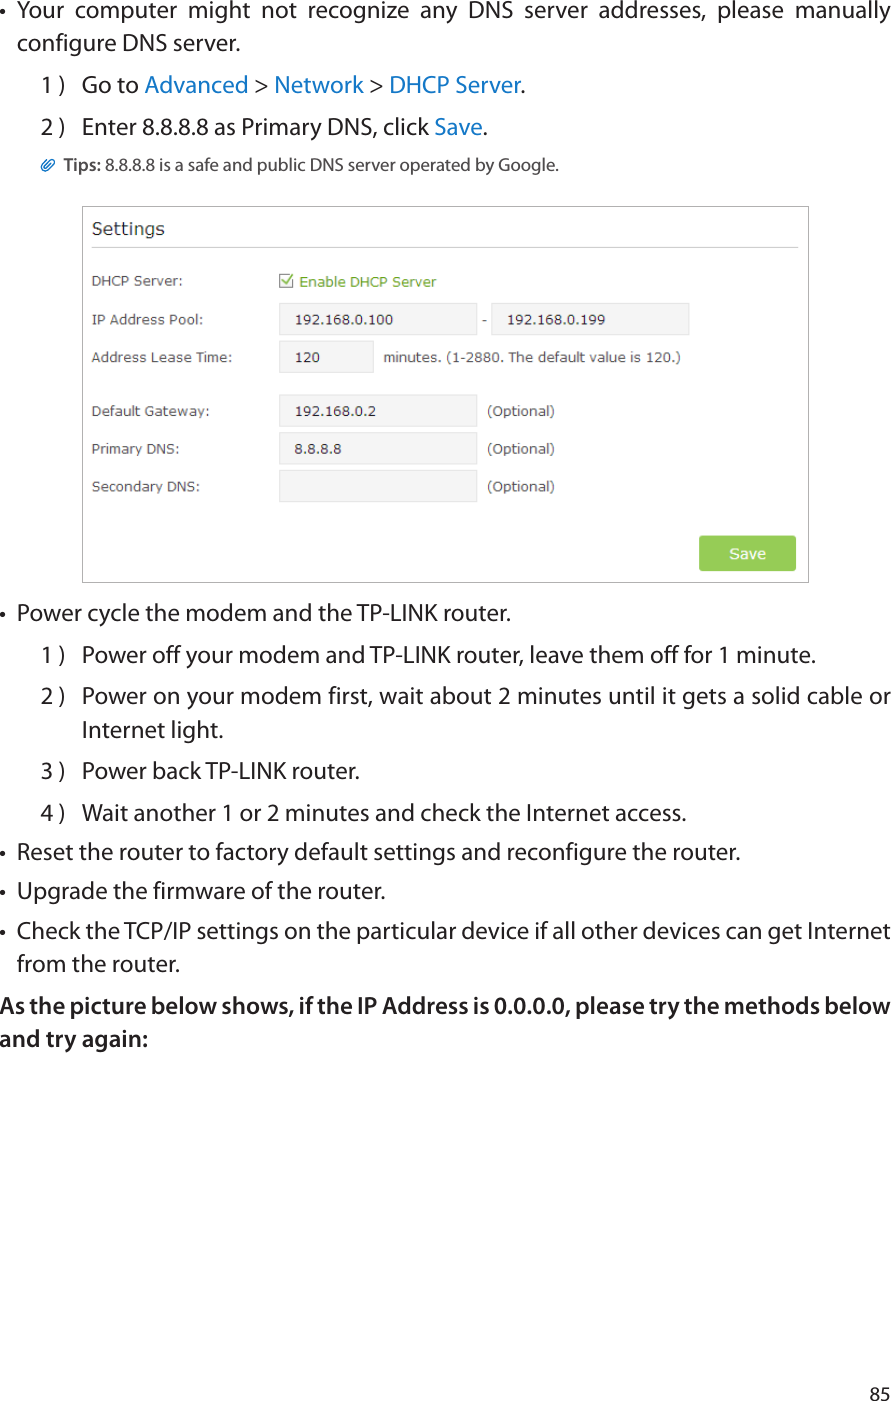 85•  Your computer might not recognize any DNS server addresses, please manually configure DNS server.1 )  Go to Advanced &gt; Network &gt; DHCP Server.2 )  Enter 8.8.8.8 as Primary DNS, click Save. Tips: 8.8.8.8 is a safe and public DNS server operated by Google.•  Power cycle the modem and the TP-LINK router.1 )  Power off your modem and TP-LINK router, leave them off for 1 minute.2 )  Power on your modem first, wait about 2 minutes until it gets a solid cable or Internet light.3 )  Power back TP-LINK router.4 )  Wait another 1 or 2 minutes and check the Internet access.•  Reset the router to factory default settings and reconfigure the router.•  Upgrade the firmware of the router.•  Check the TCP/IP settings on the particular device if all other devices can get Internet from the router.As the picture below shows, if the IP Address is 0.0.0.0, please try the methods below and try again: